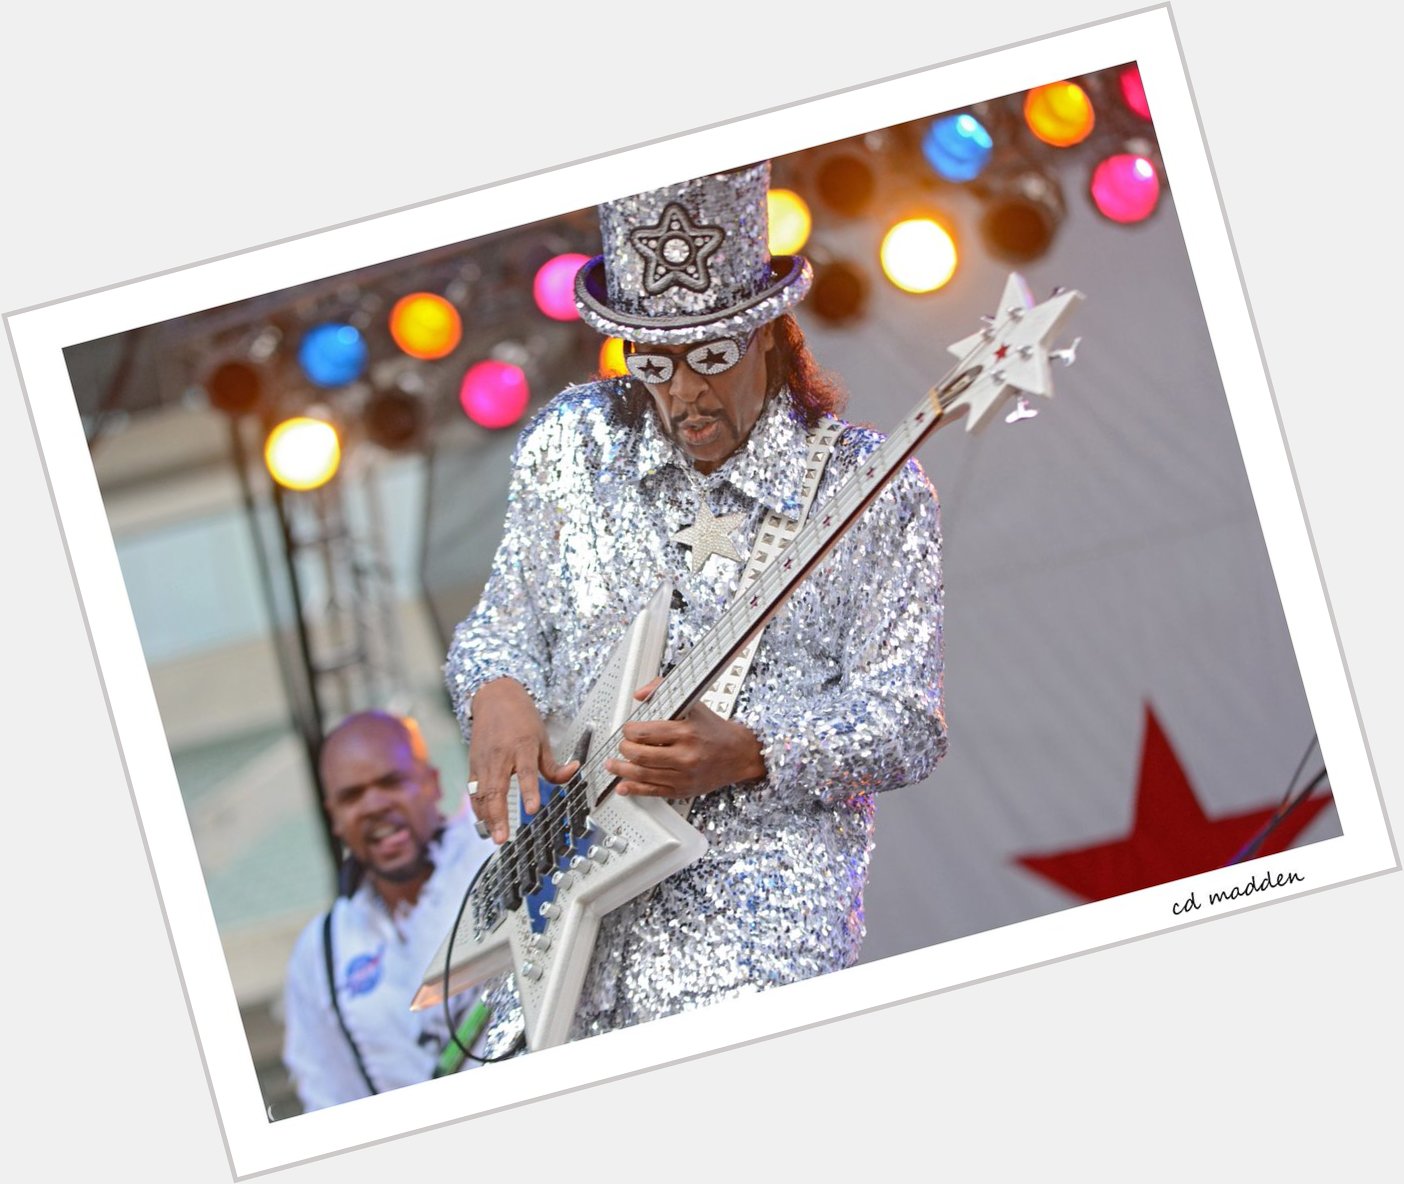 Happy Birthday to Bootsy Collins, The Humble Star. So glad we found ourselves on the crazy ship together.       